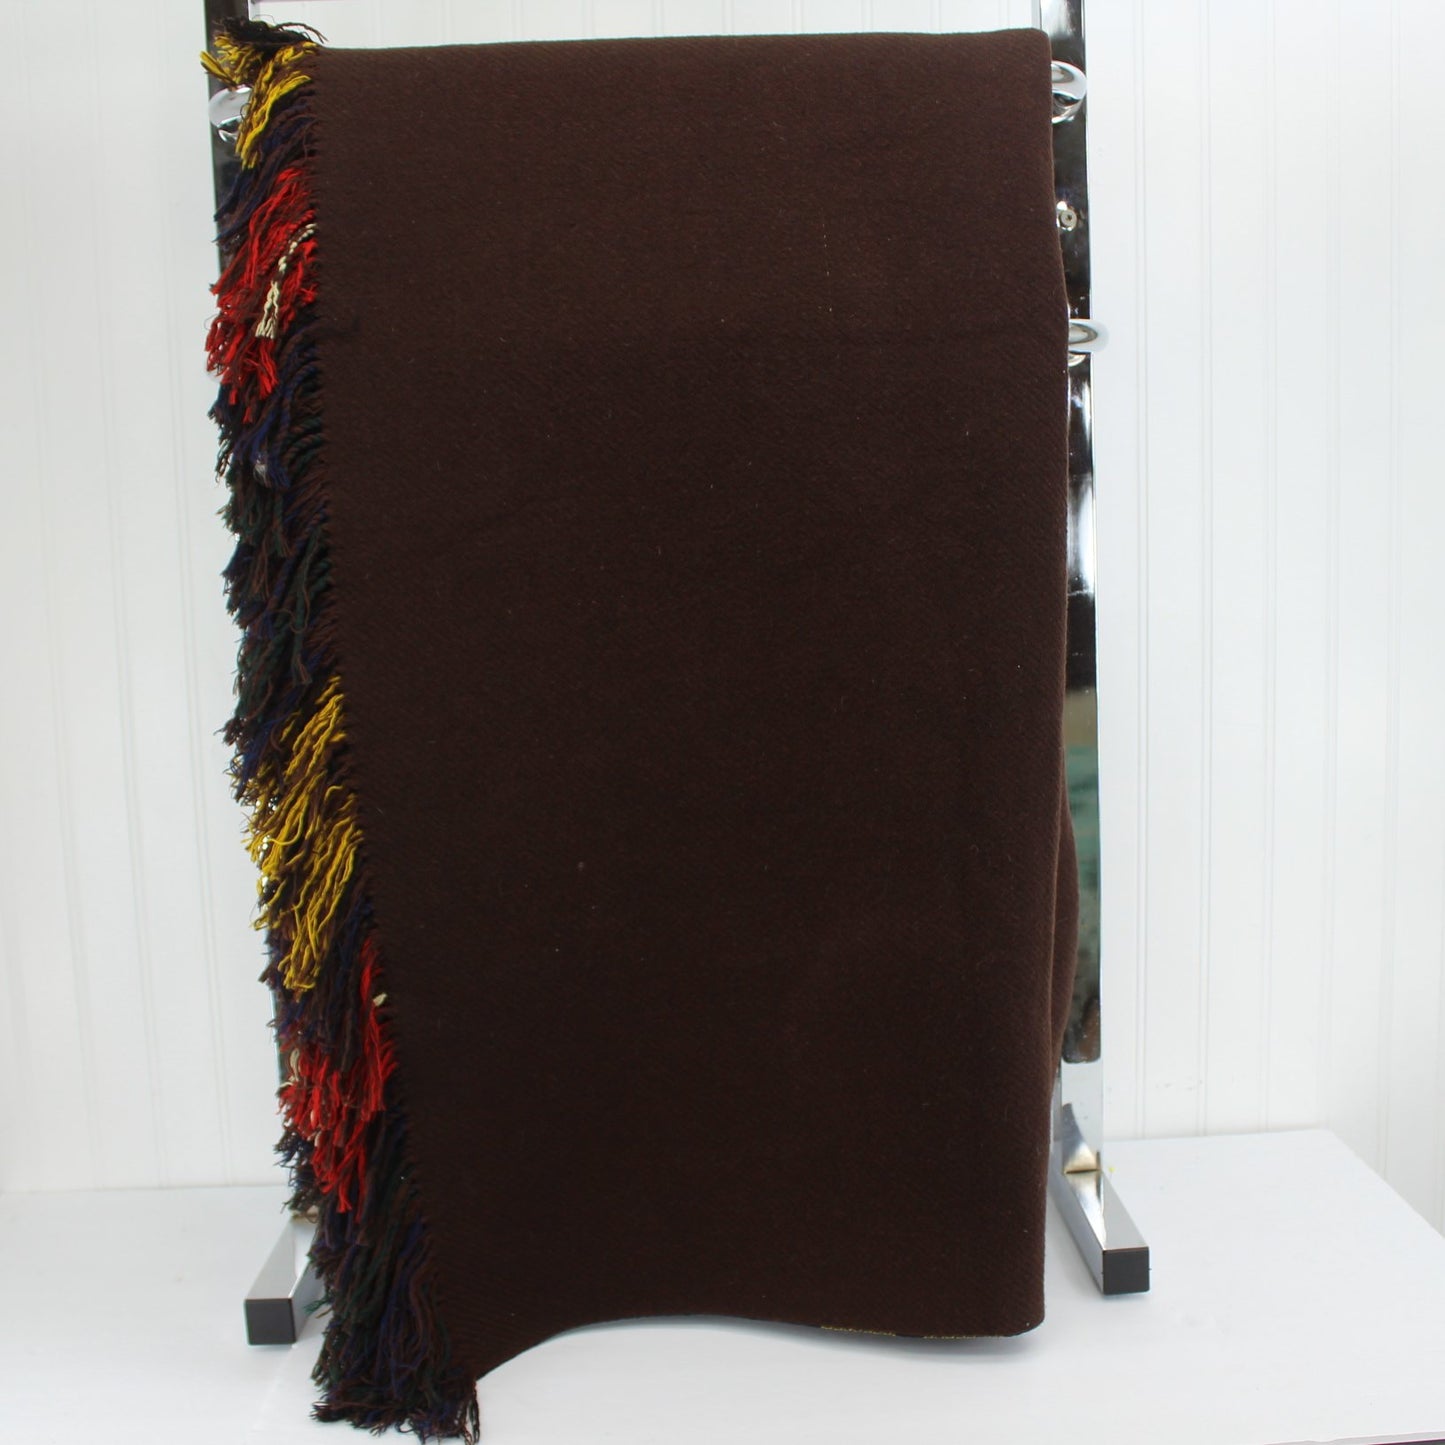 Wool Blanket Throw Reversible Plaid to Solid Brown Double Fabric solid side of throw dark brown